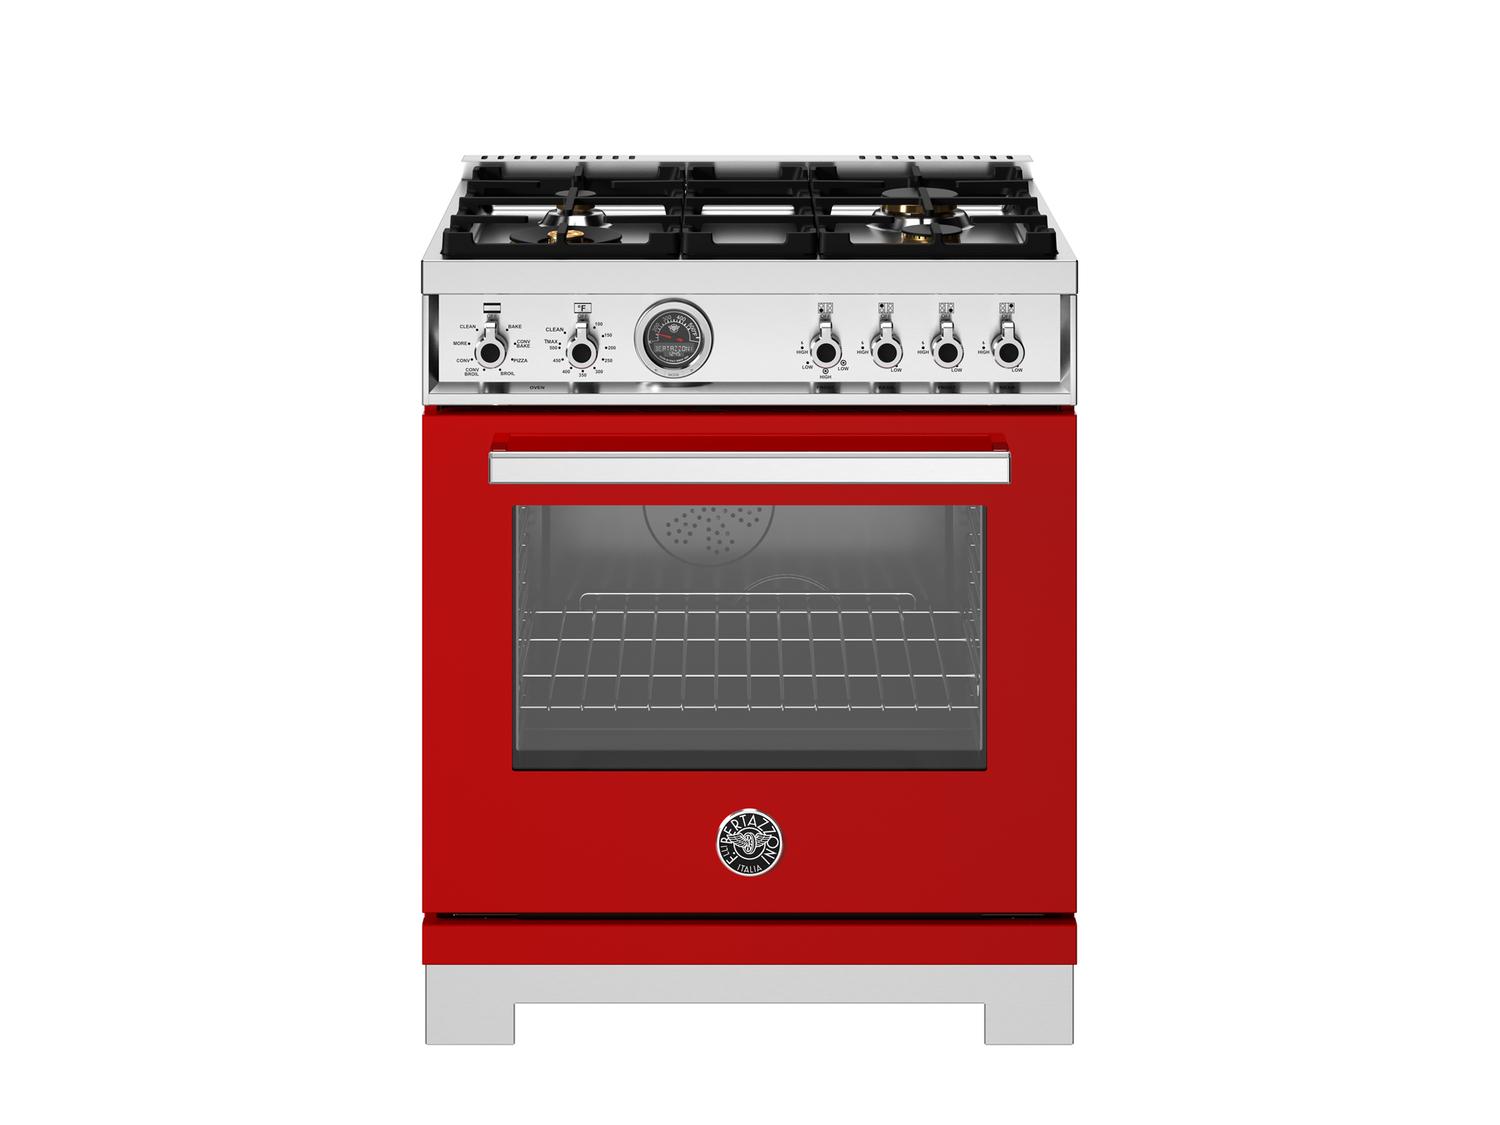 Bertazzoni PRO304BFEPROT 30 Inch Dual Fuel Range, 4 Brass Burners, Electric Self-Clean Oven Rosso